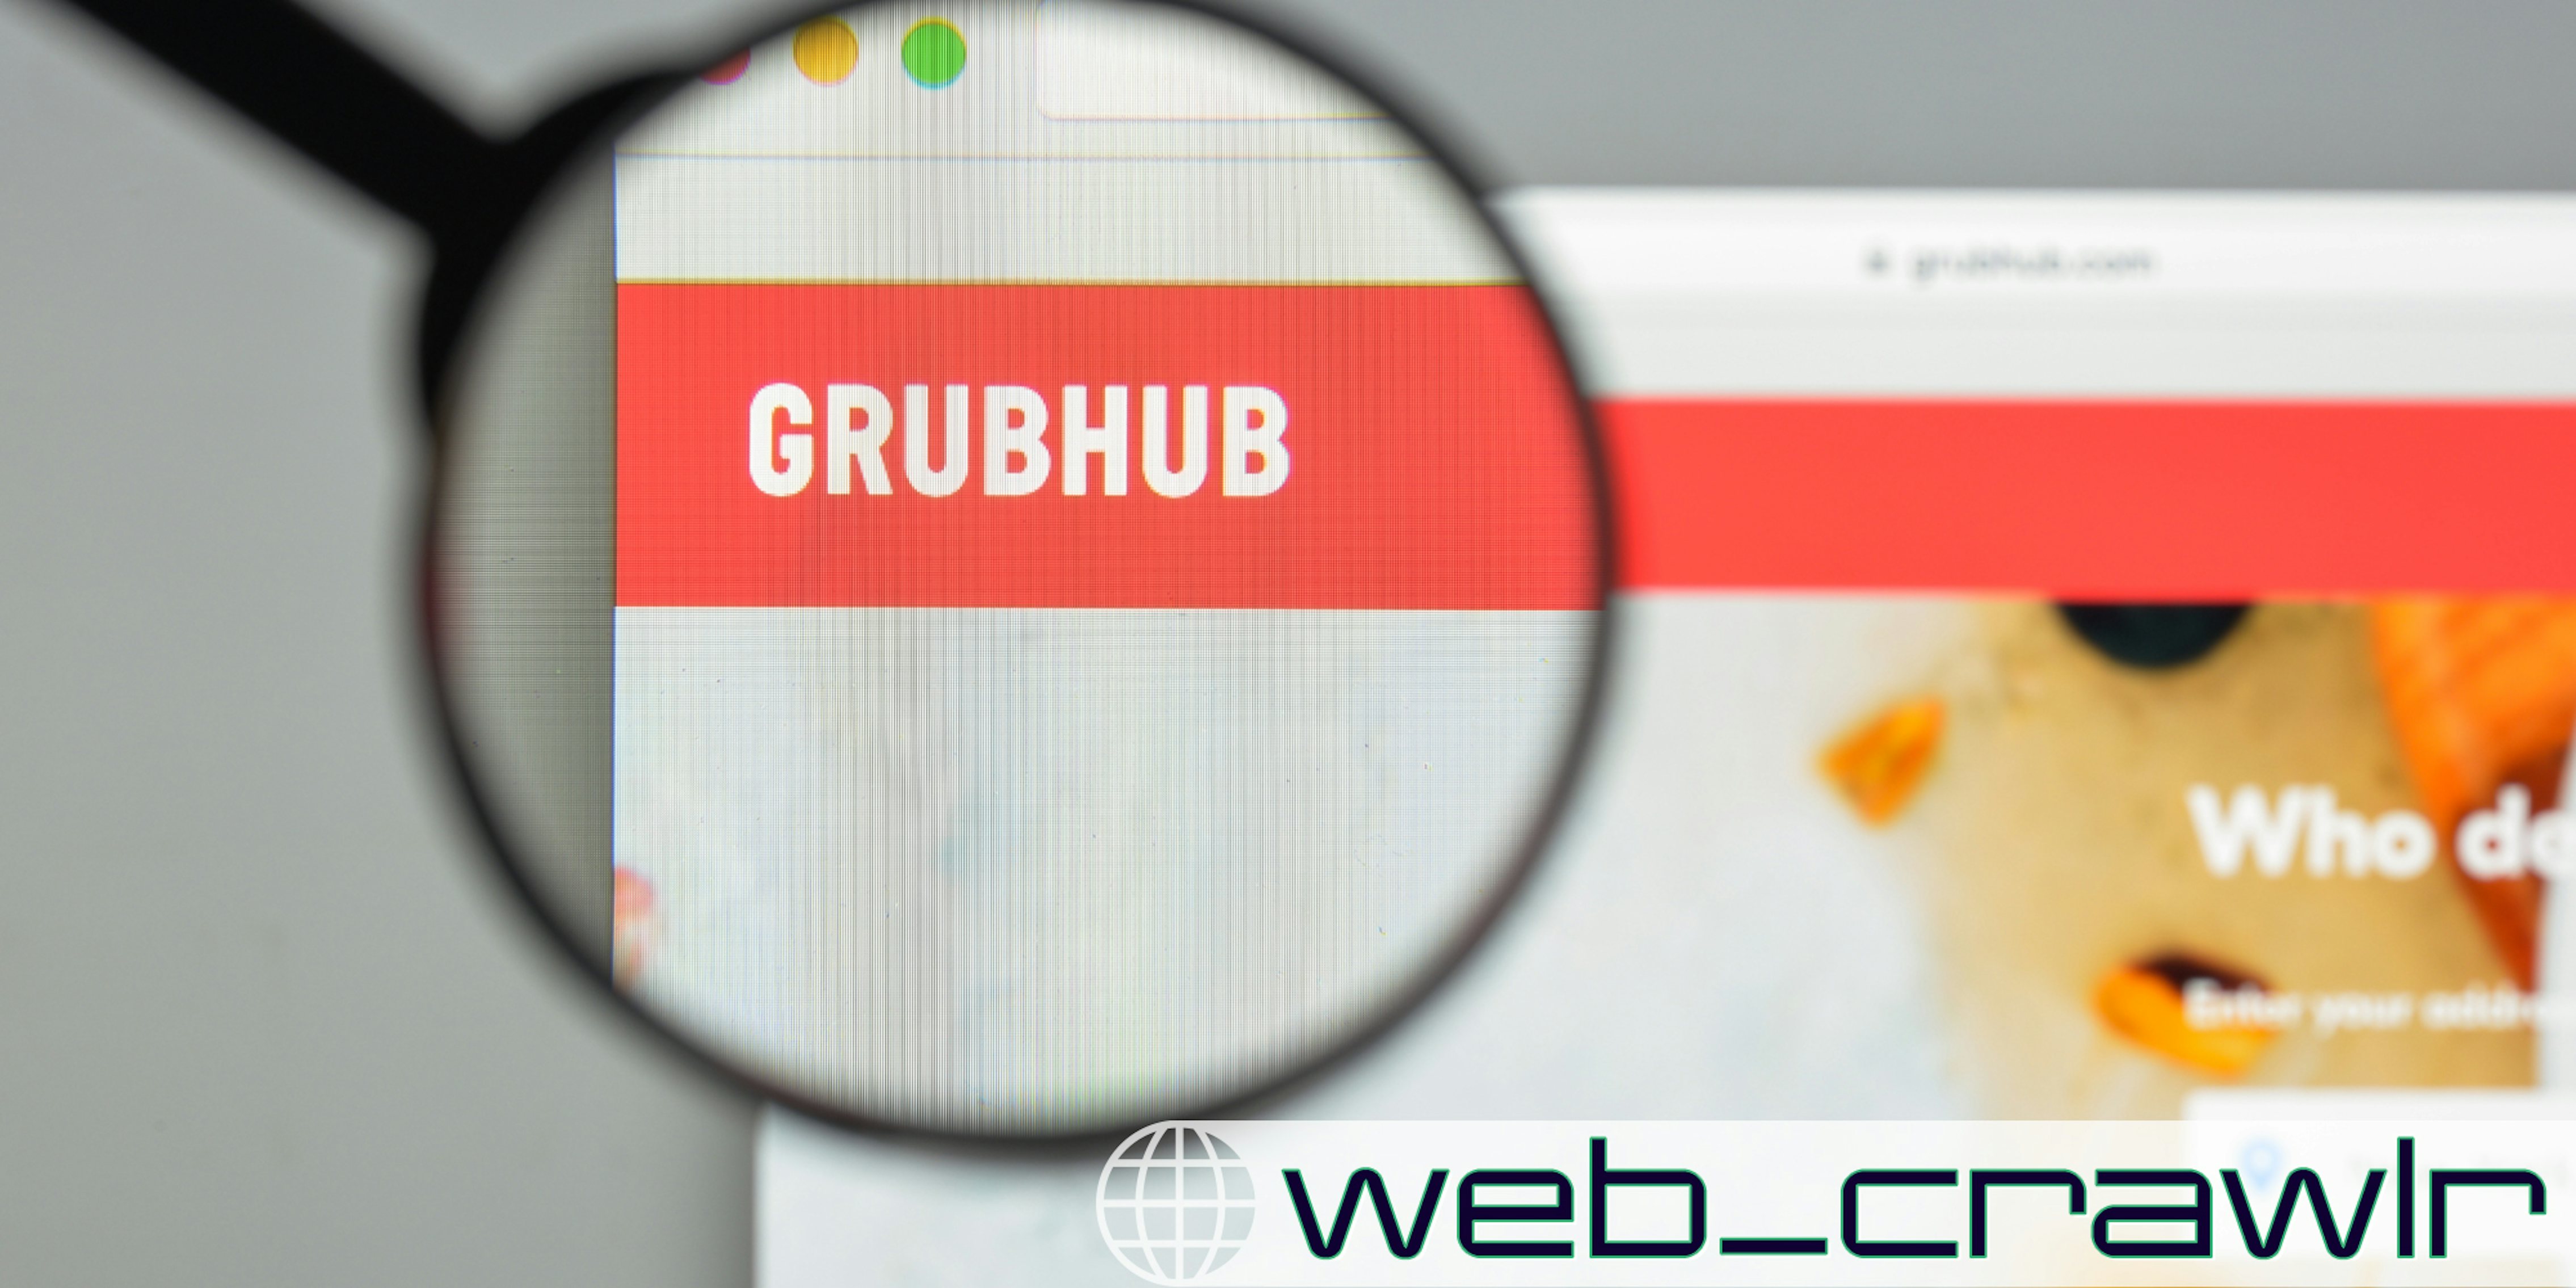 A computer screen with the GrubHub logo on it. A magnifying glass is over the word Grubhub. In the lower right corner is the Daily Dot newsletter web_crawlr logo.